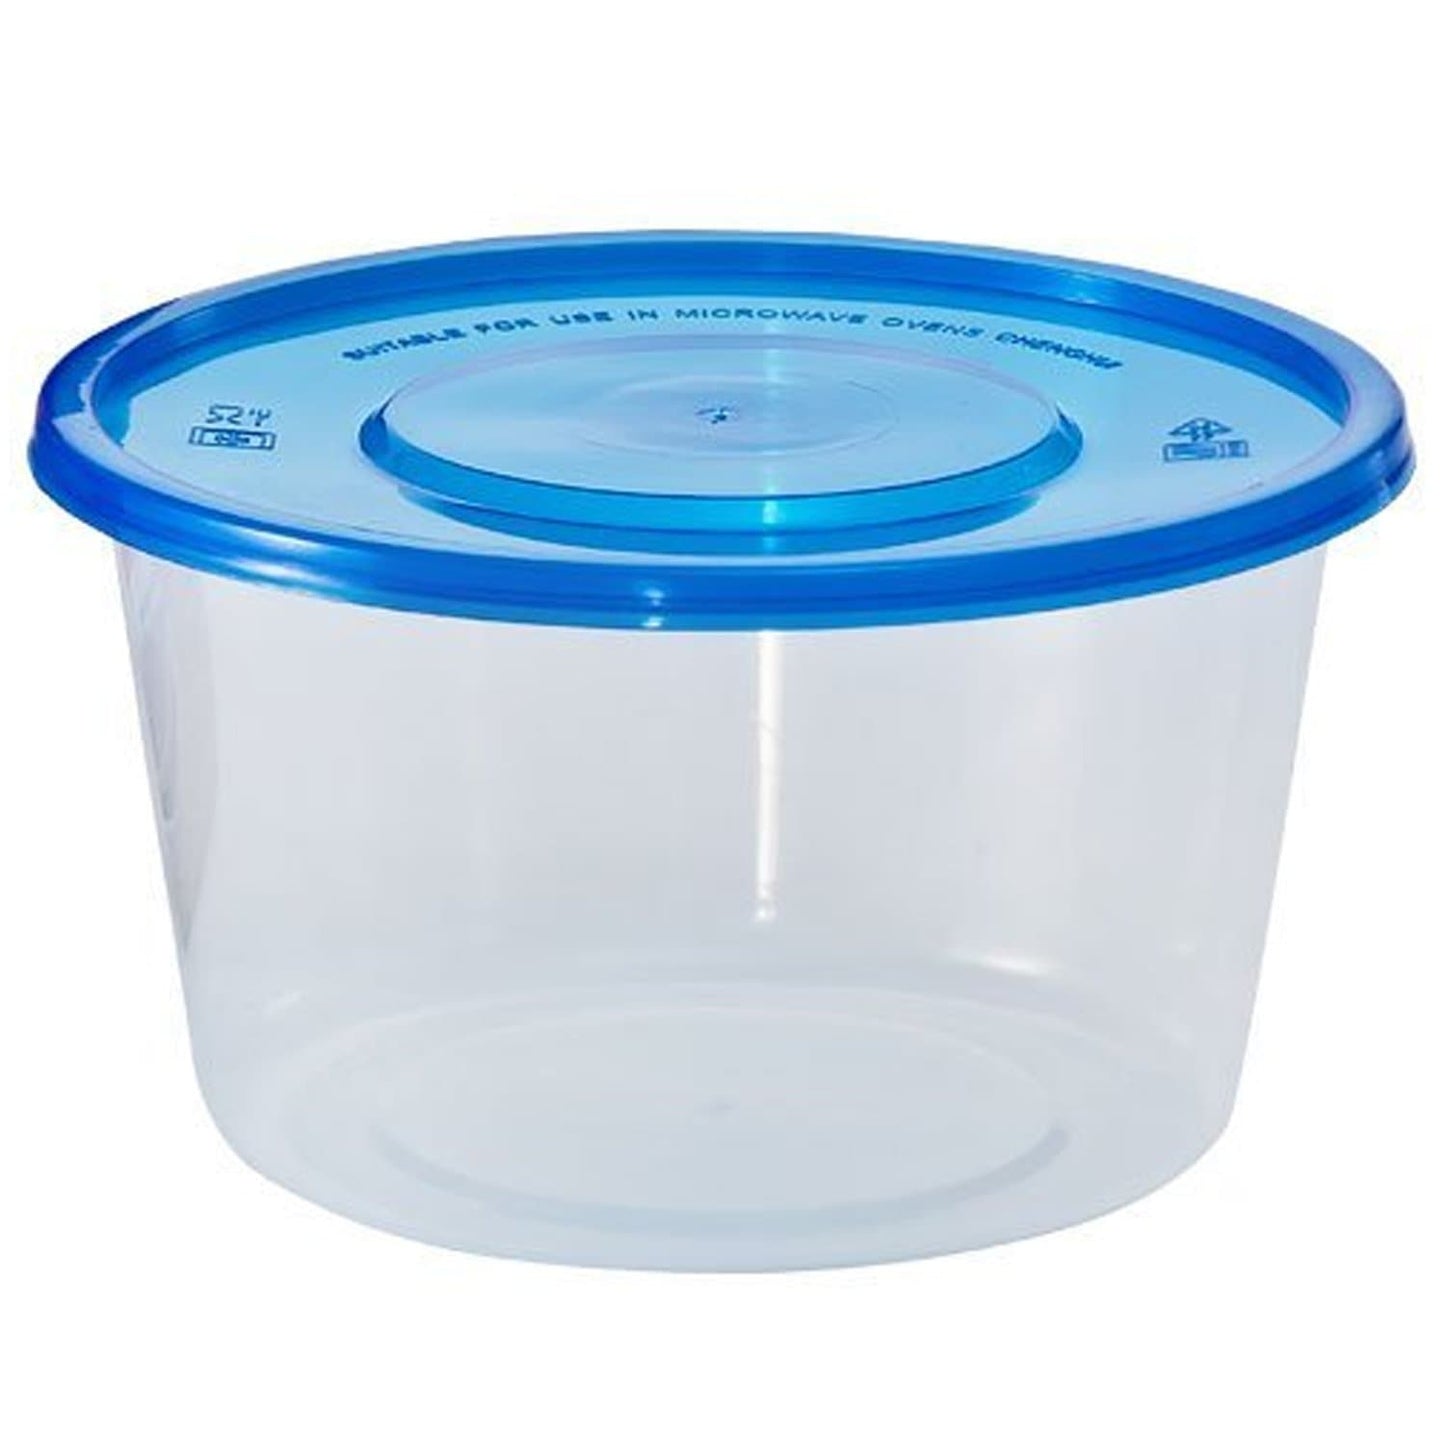 https://onlyonestopshop.com/cdn/shop/products/Nicole-Home-Collection-Containers-With-Lids-Large-Round-Blue-34-oz-3Ct-Nicole-Collection-1603927232.jpg?v=1609249714&width=1445